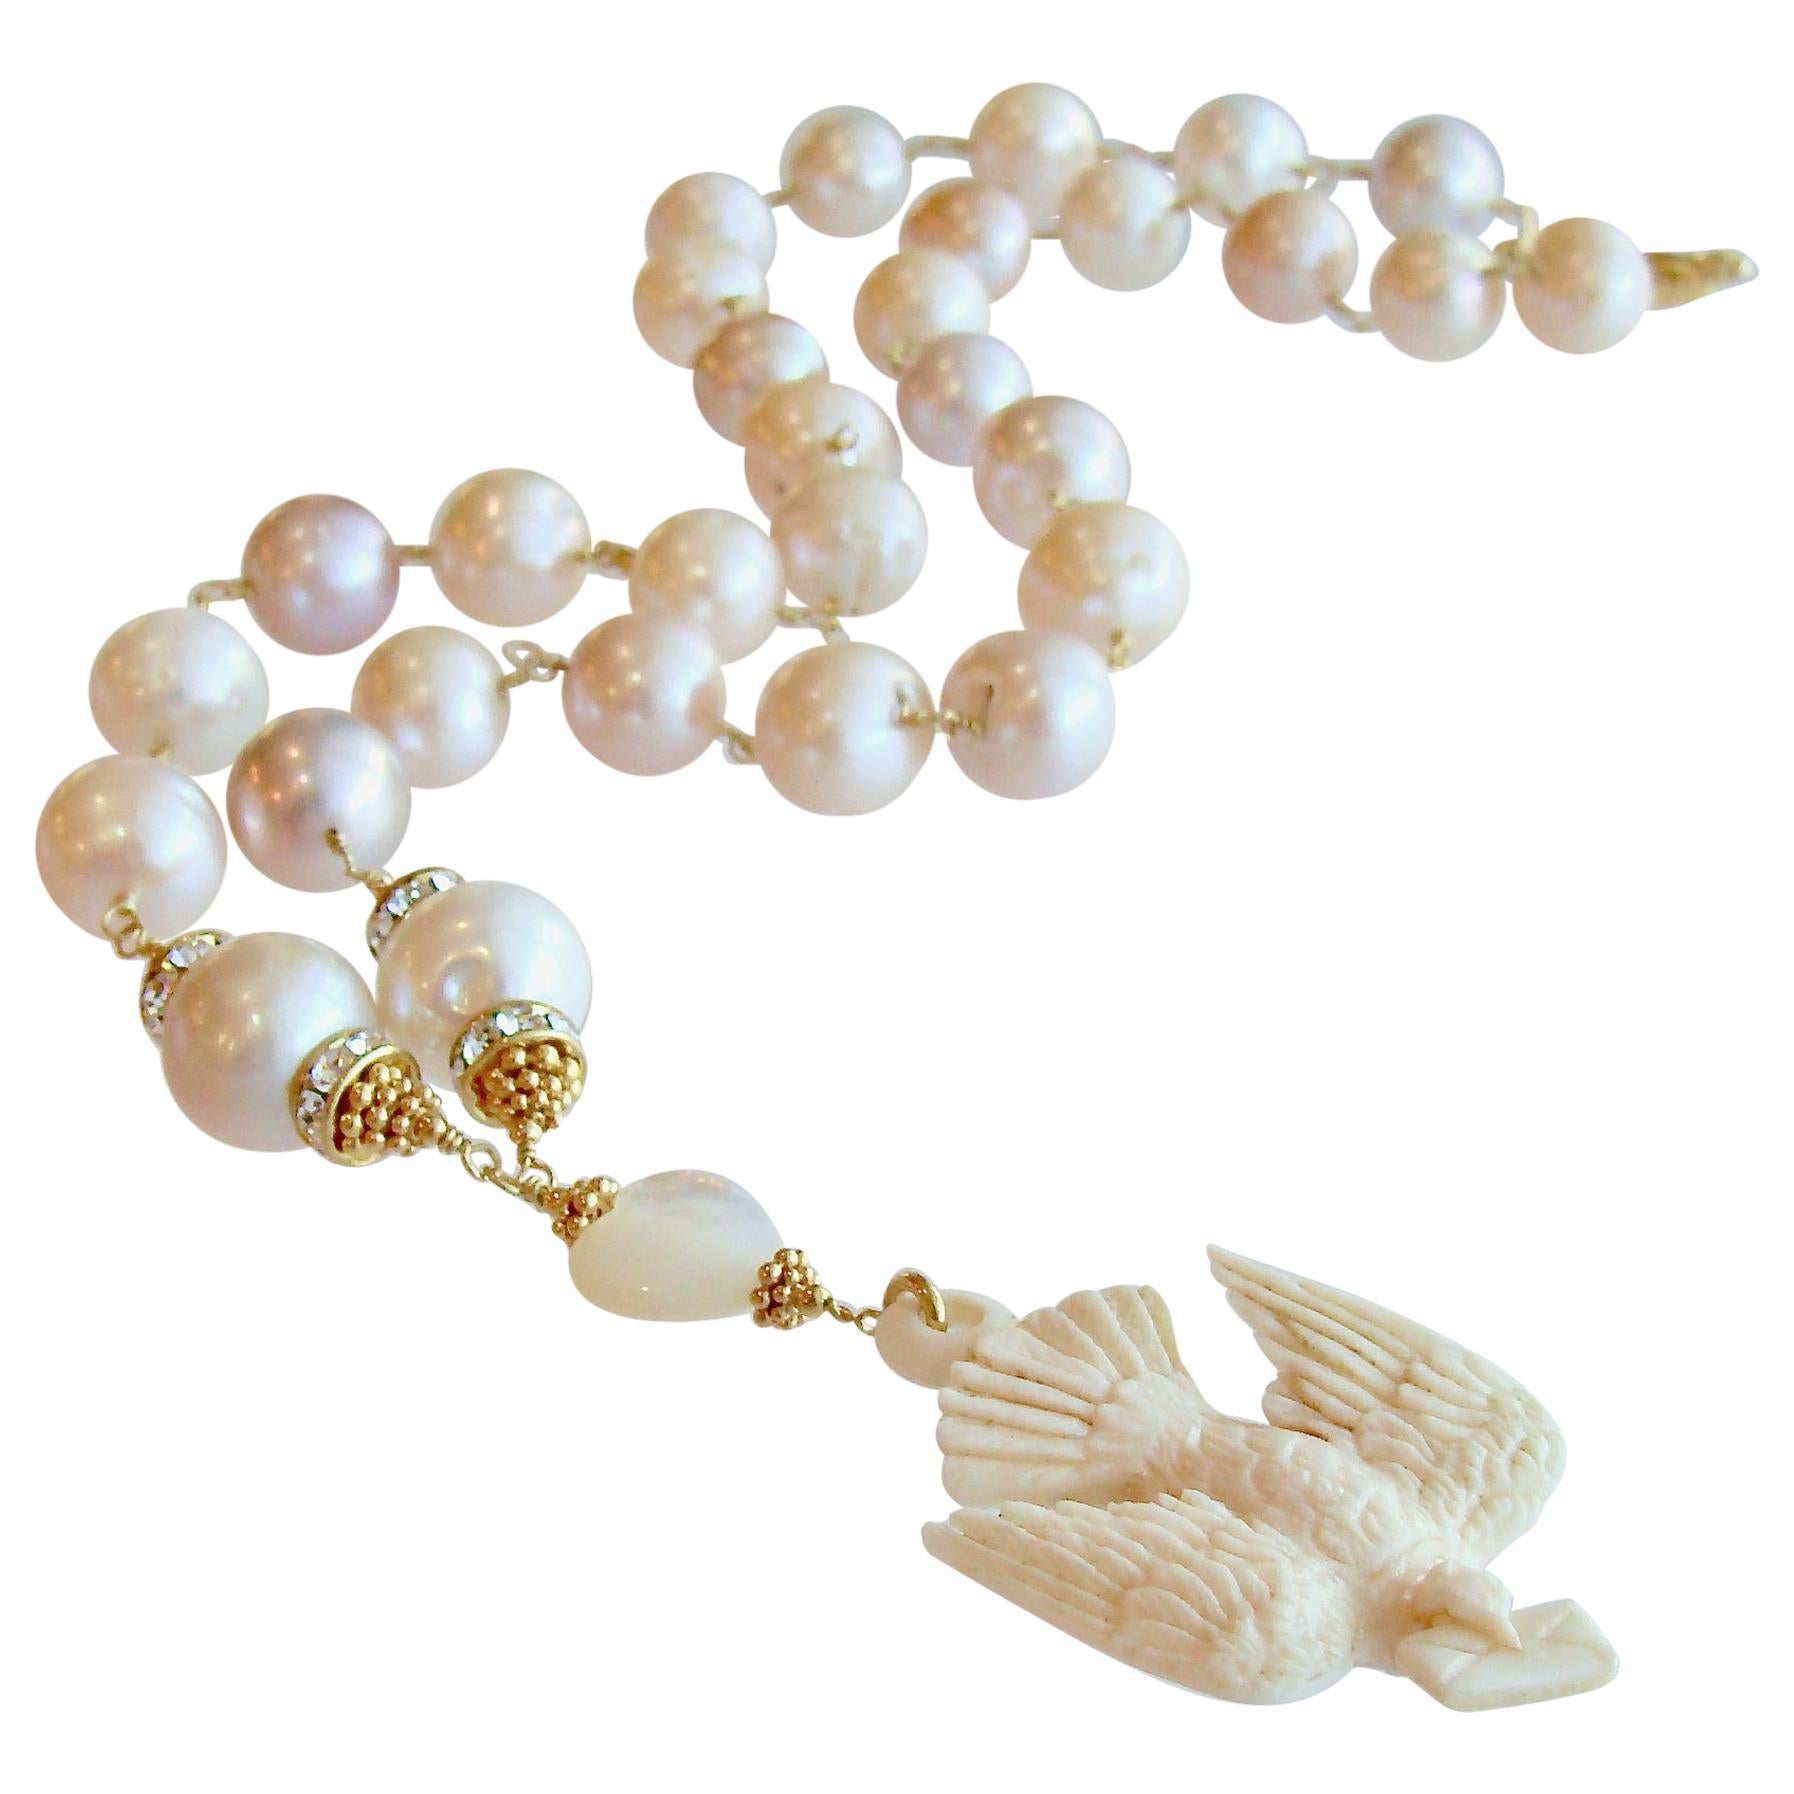 Saint Esprit Dove with Love Note Natural Pink Peach Baroque Cultured Pearls